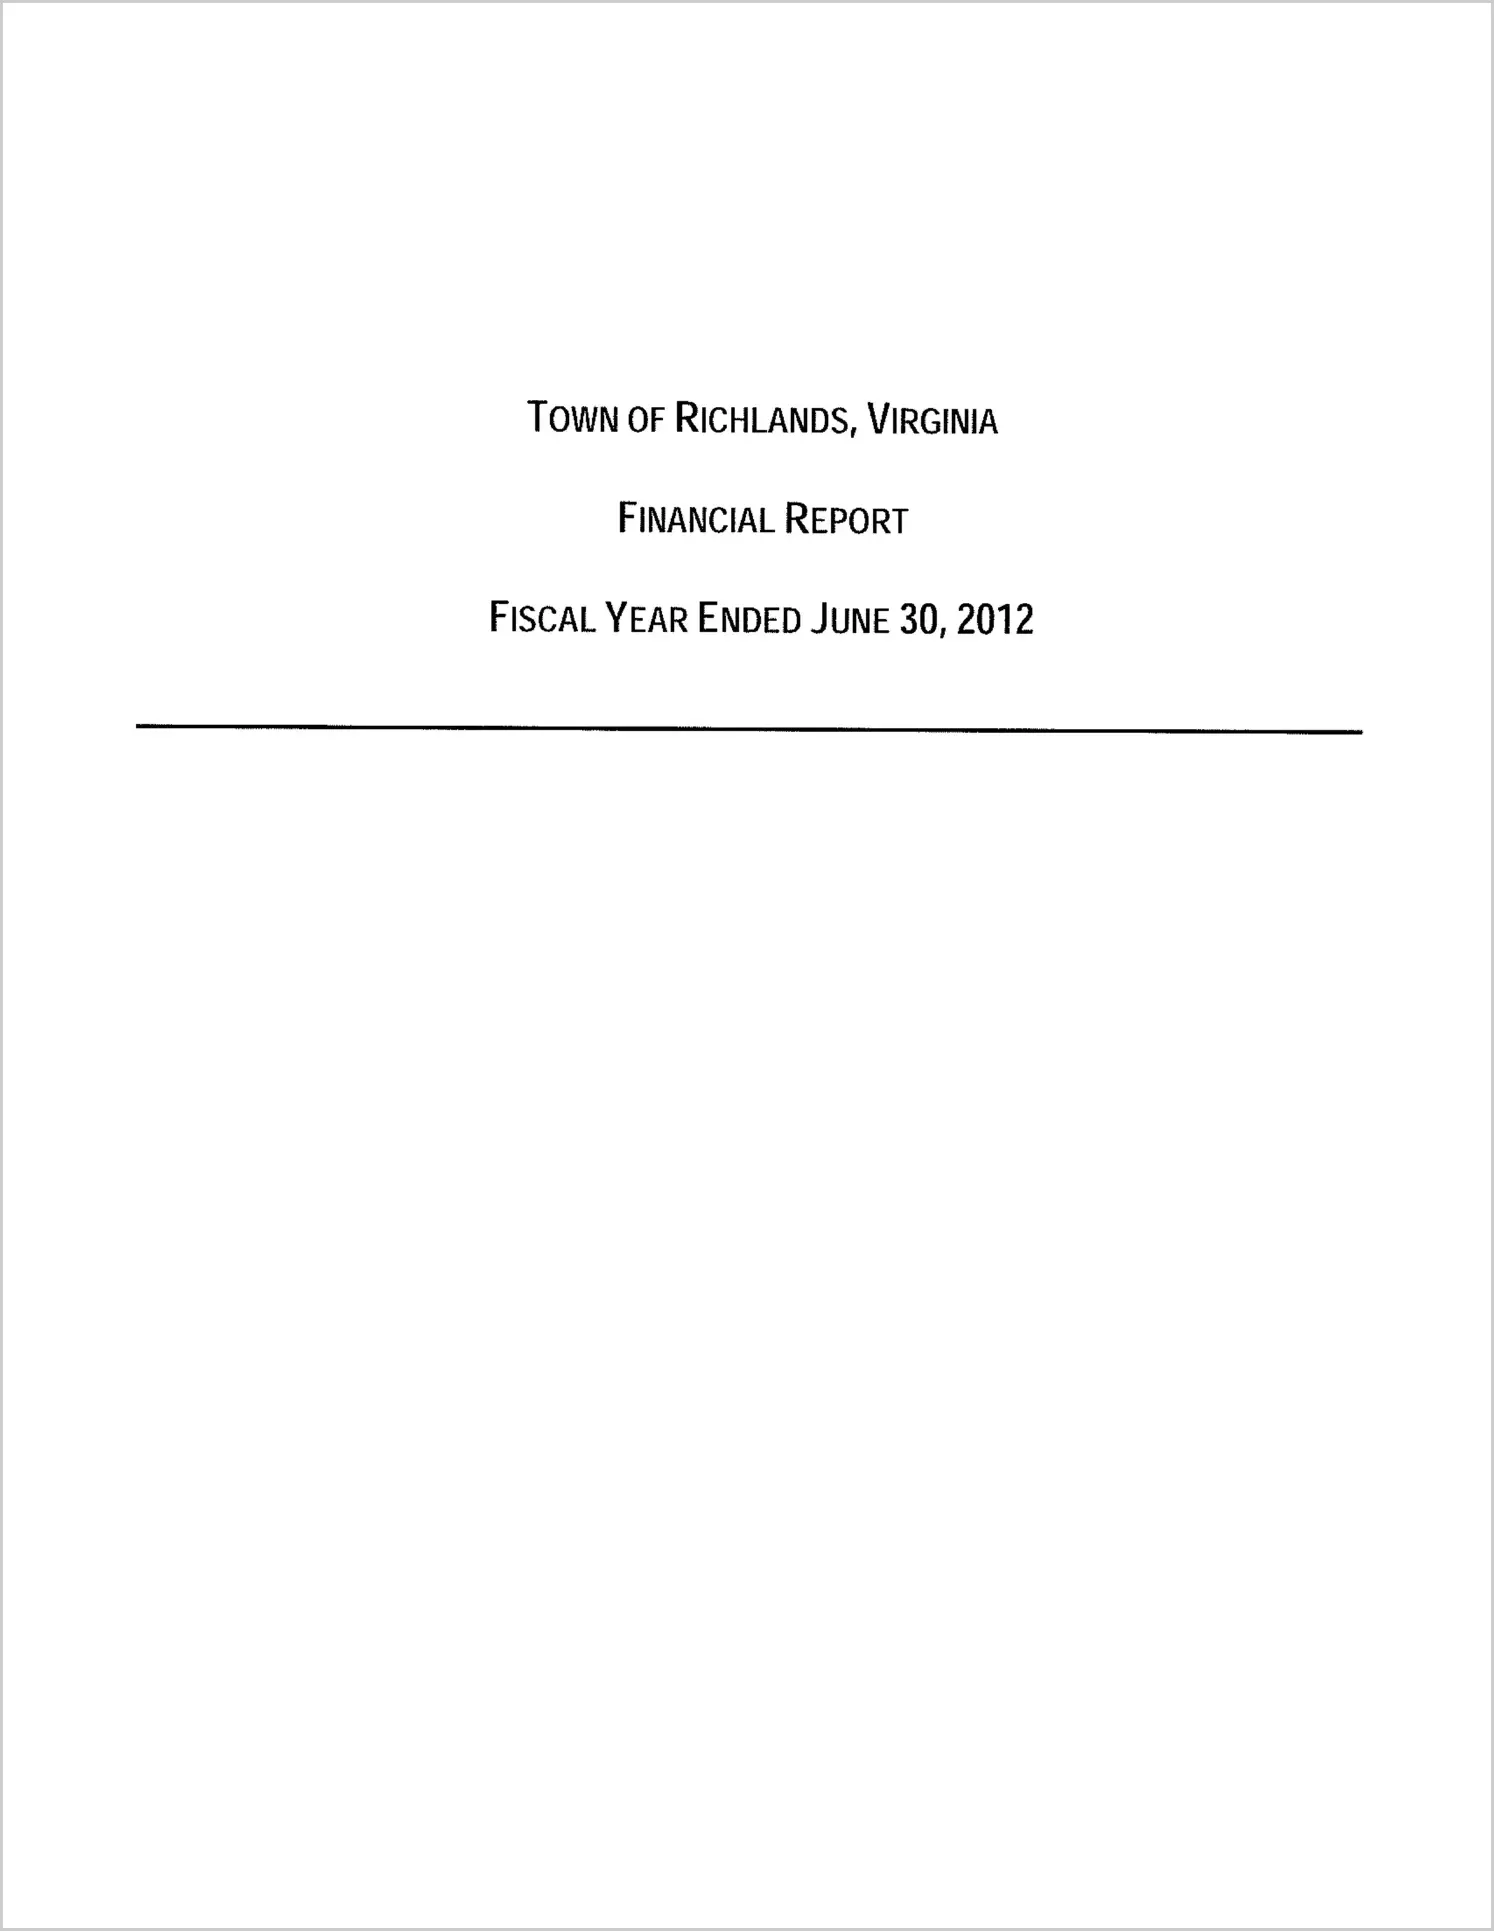 2012 Annual Financial Report for Town of Richlands